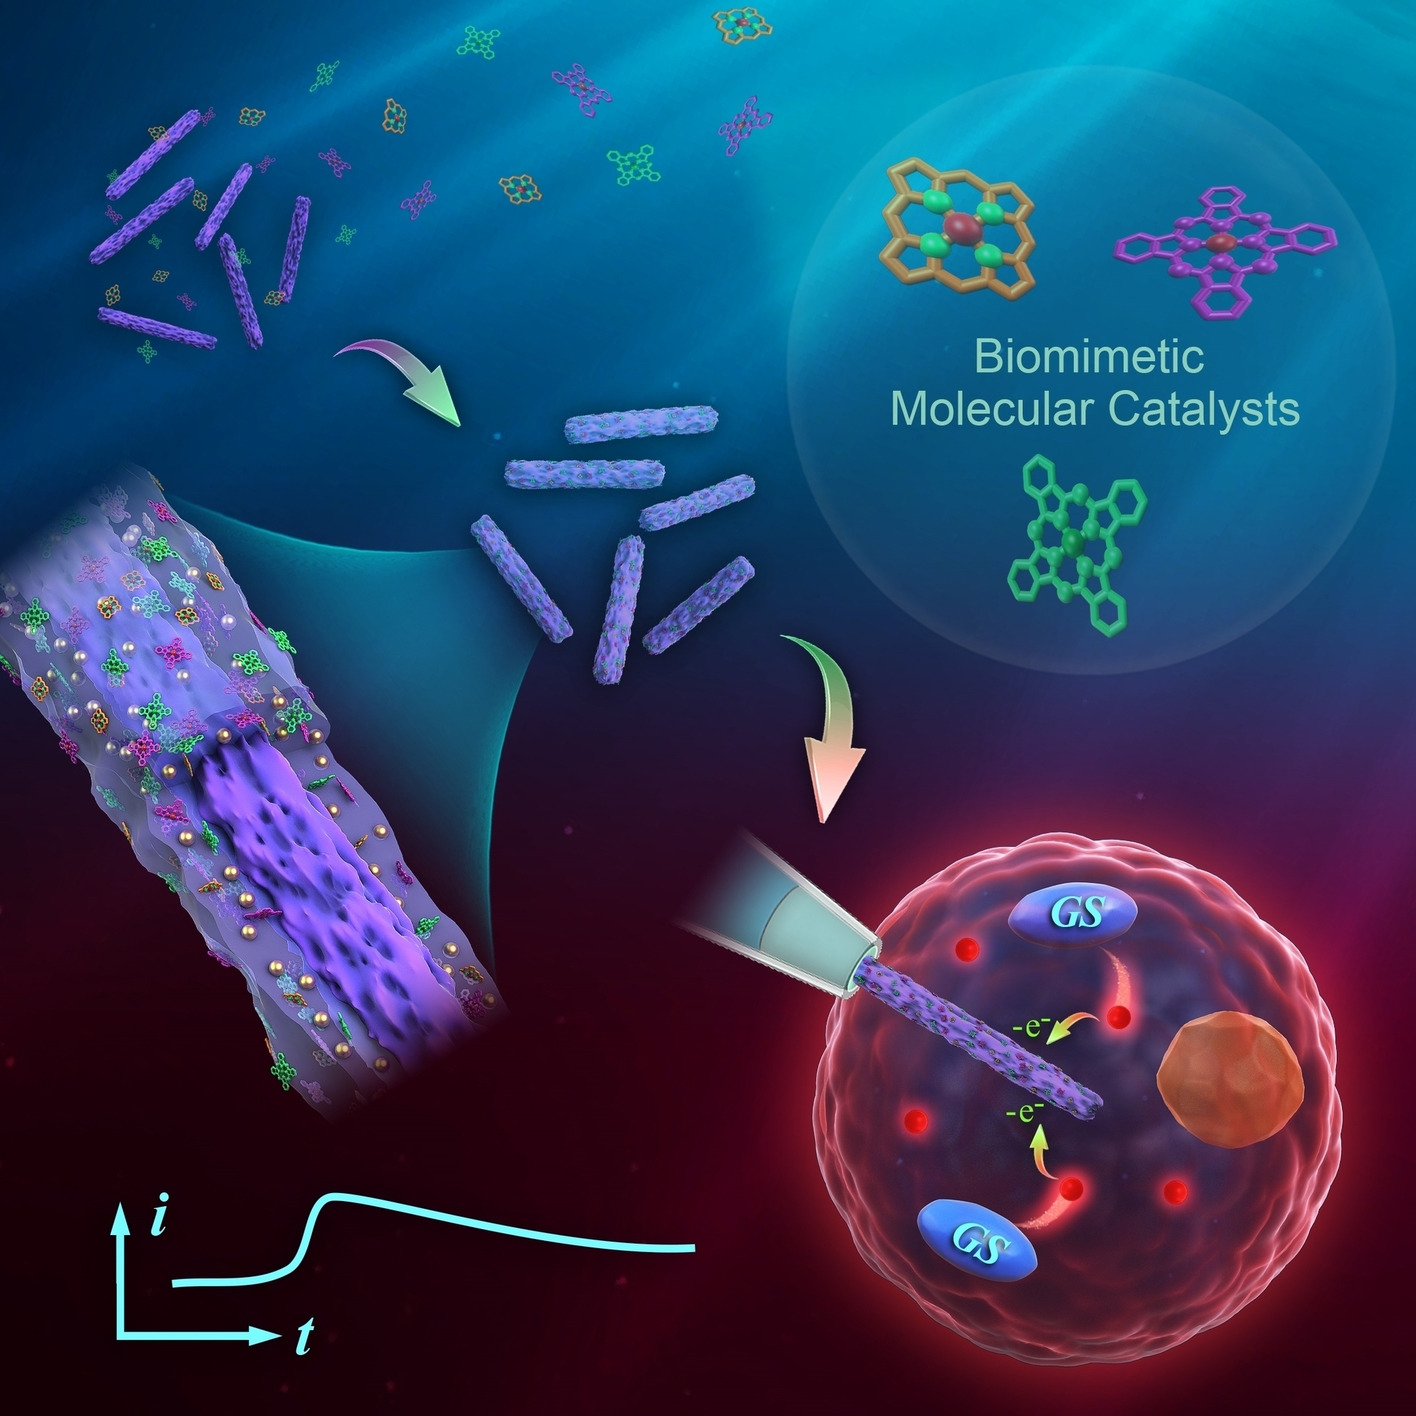 <a href='http://huanglab.whu.edu.cn/info/1032/1581.htm' target='_blank'><h4>Versatile Construction of Biomimetic Nanosensors for Electrochemical Monitoring of Intracellular Glutathione</h4> <p>​ABSTRACT：The current strategies for nanoelectrode functionalization usually involve sophisticated modification procedures, uncontrollable and unstable modifier assembly, as well as a limited variety of modifiers. To address this issue, we propose a versatile strategy for large-scale synthesis of biomimetic molecular catalysts (BMCs) modified nanowires (NWs) to construct functionalized electr...</p></a>